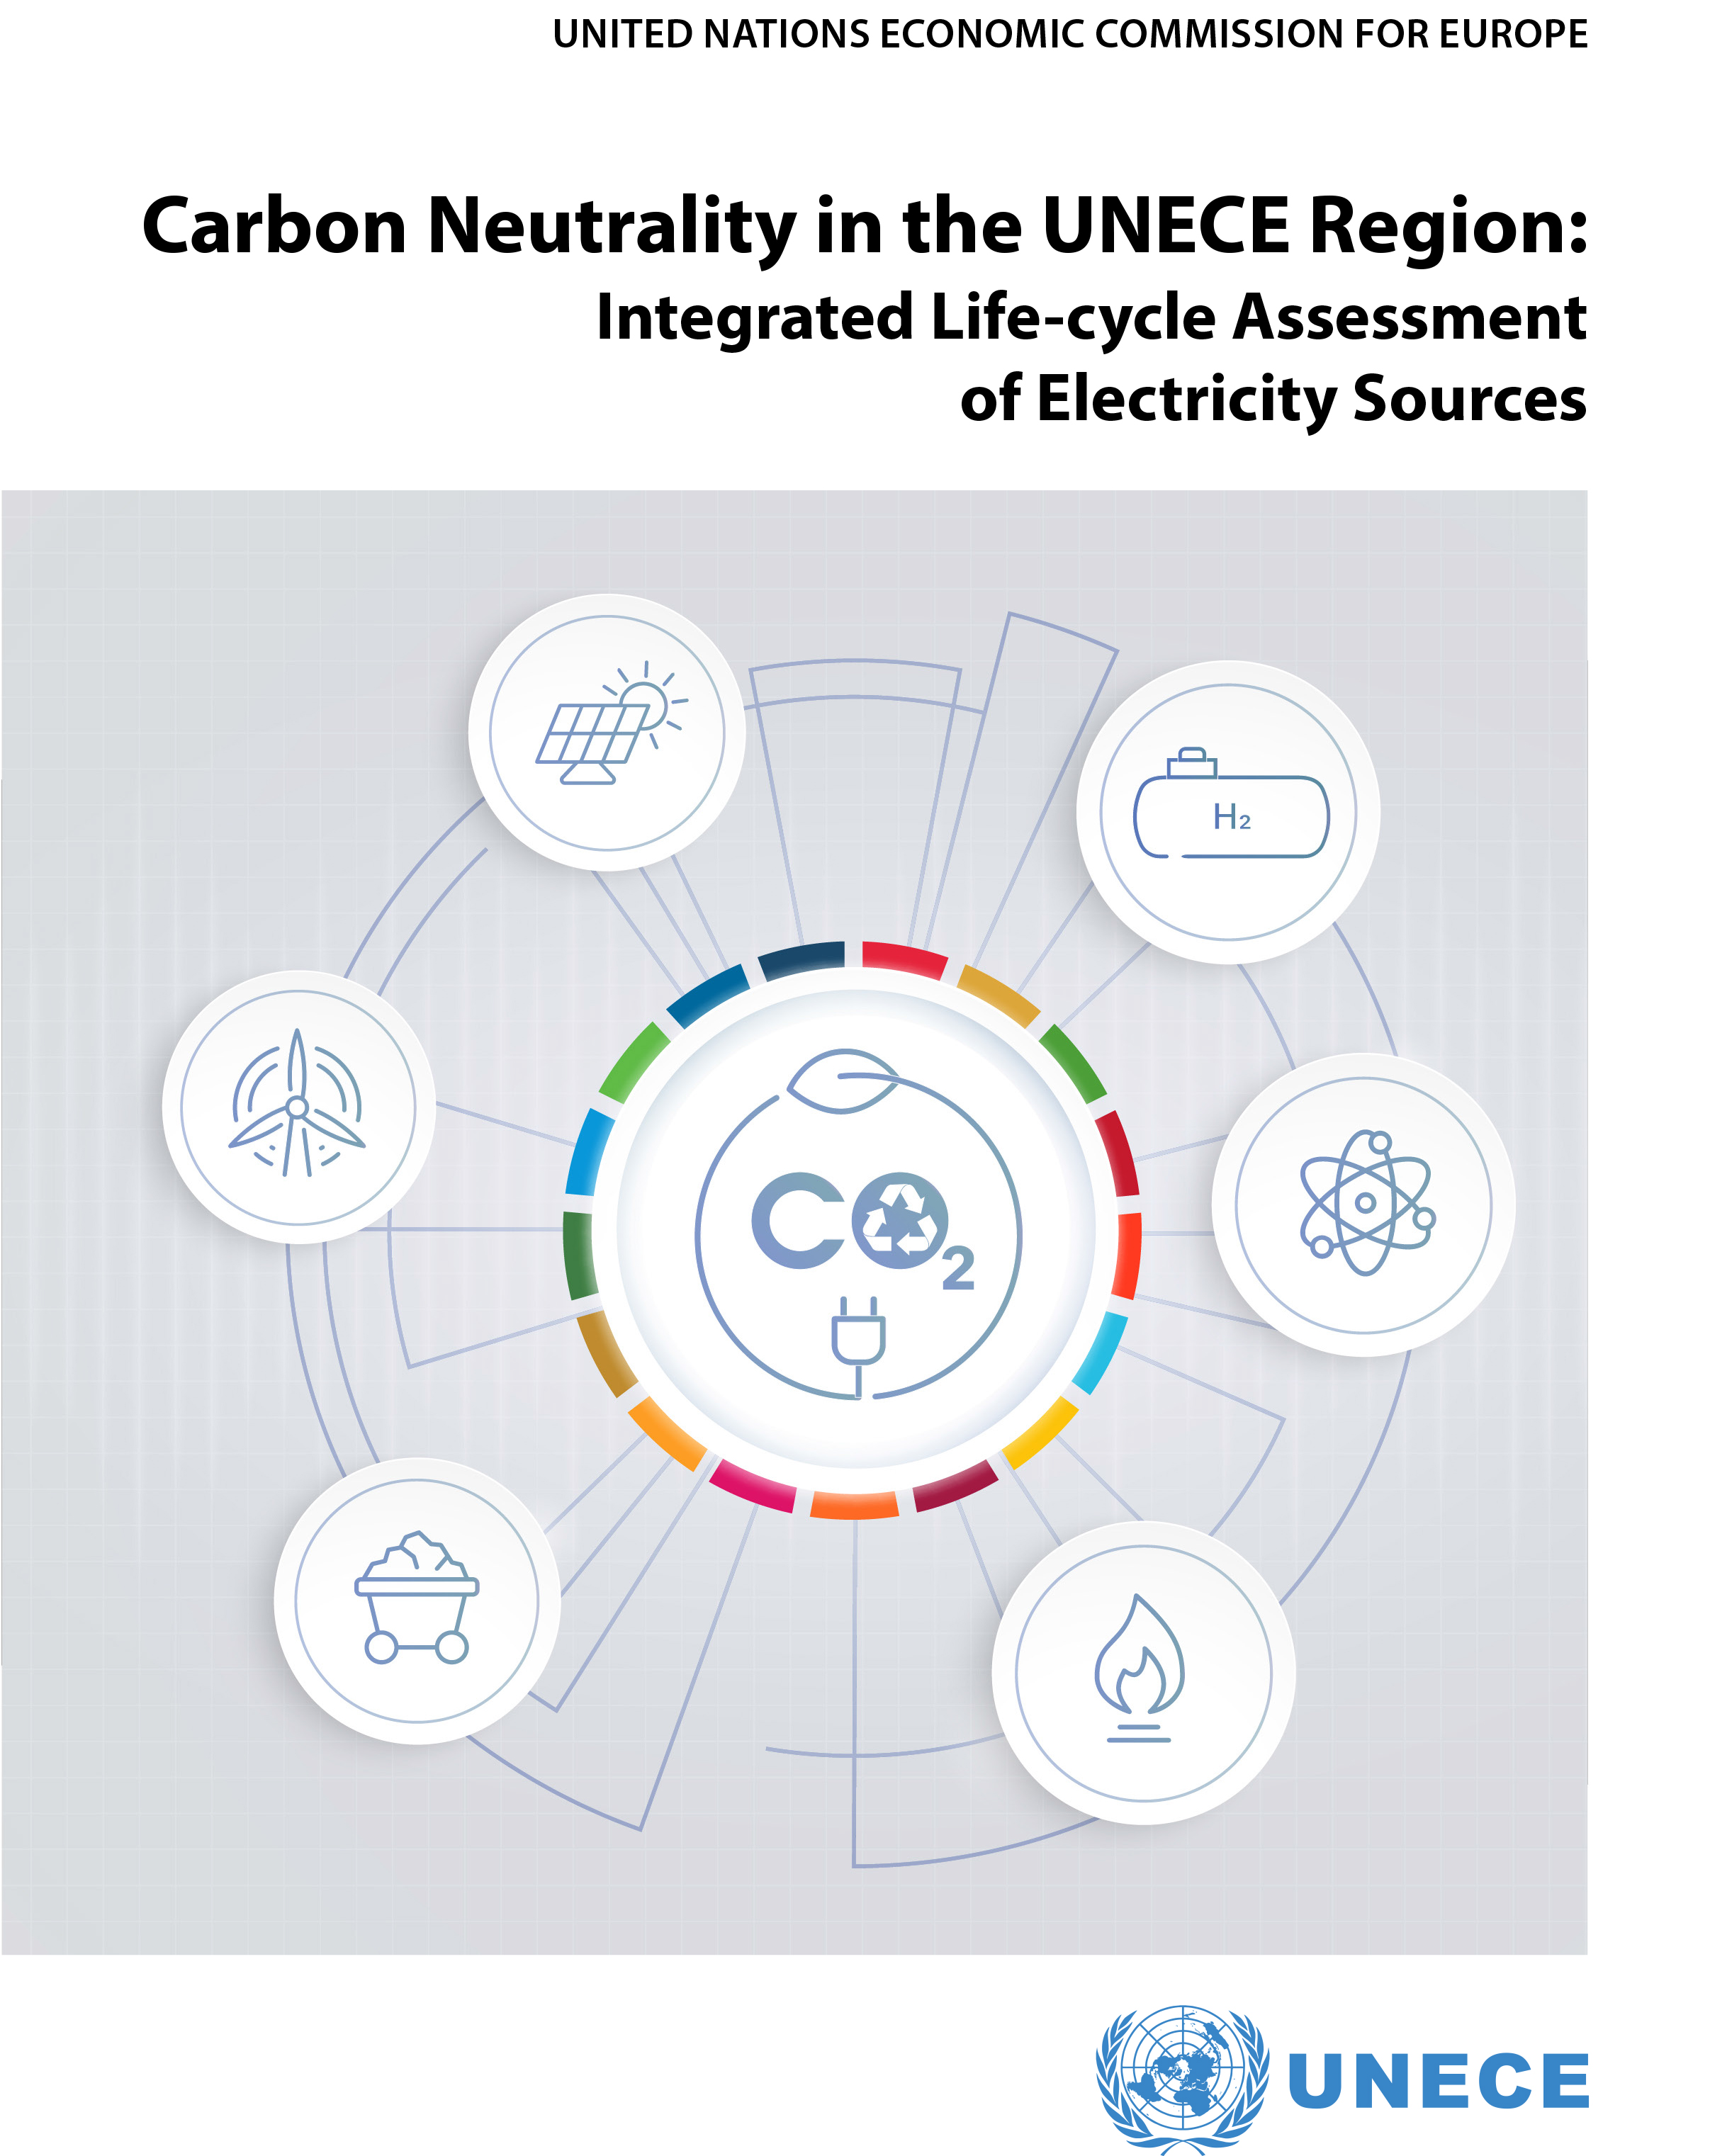 image of Carbon Neutrality in the UNECE Region: Integrated Life-cycle Assessment of Electricity Sources